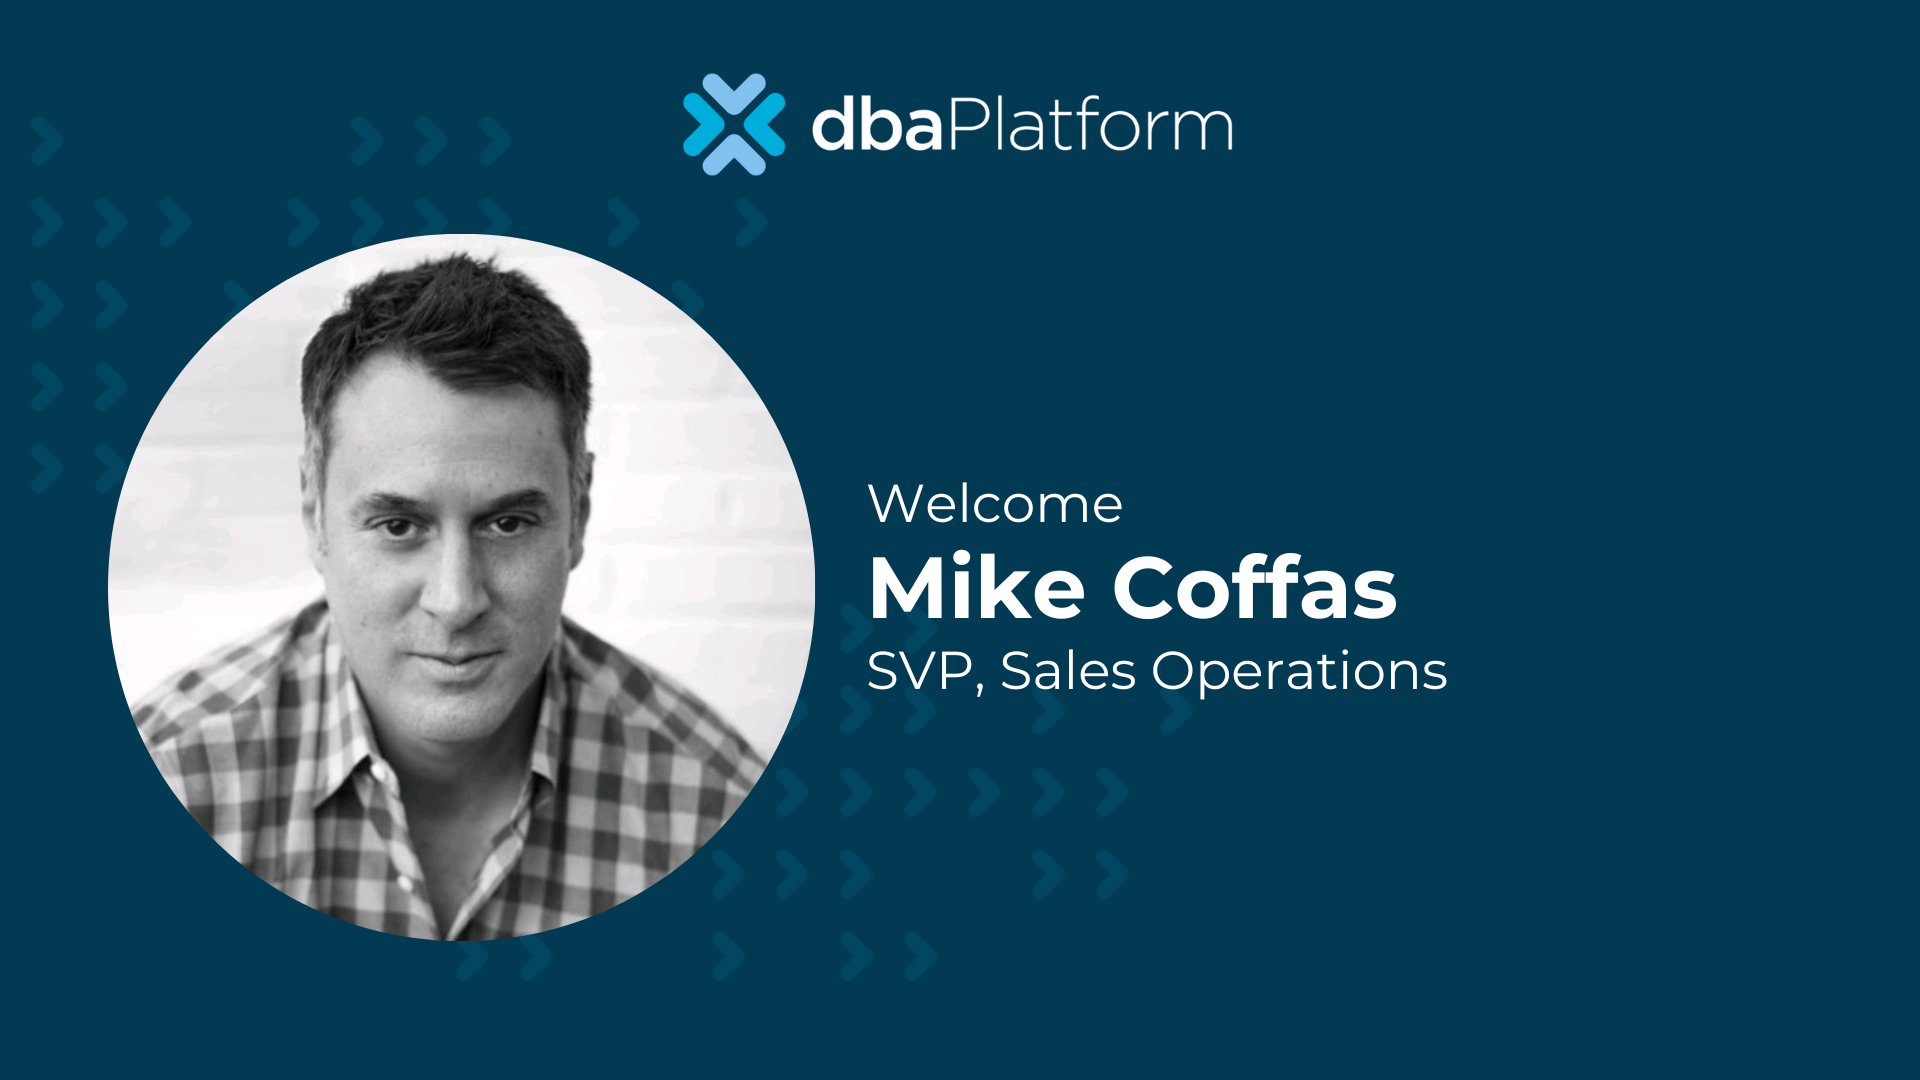 Mike Coffas joins dbaPlatform as Senior Vice President of Sales Operations